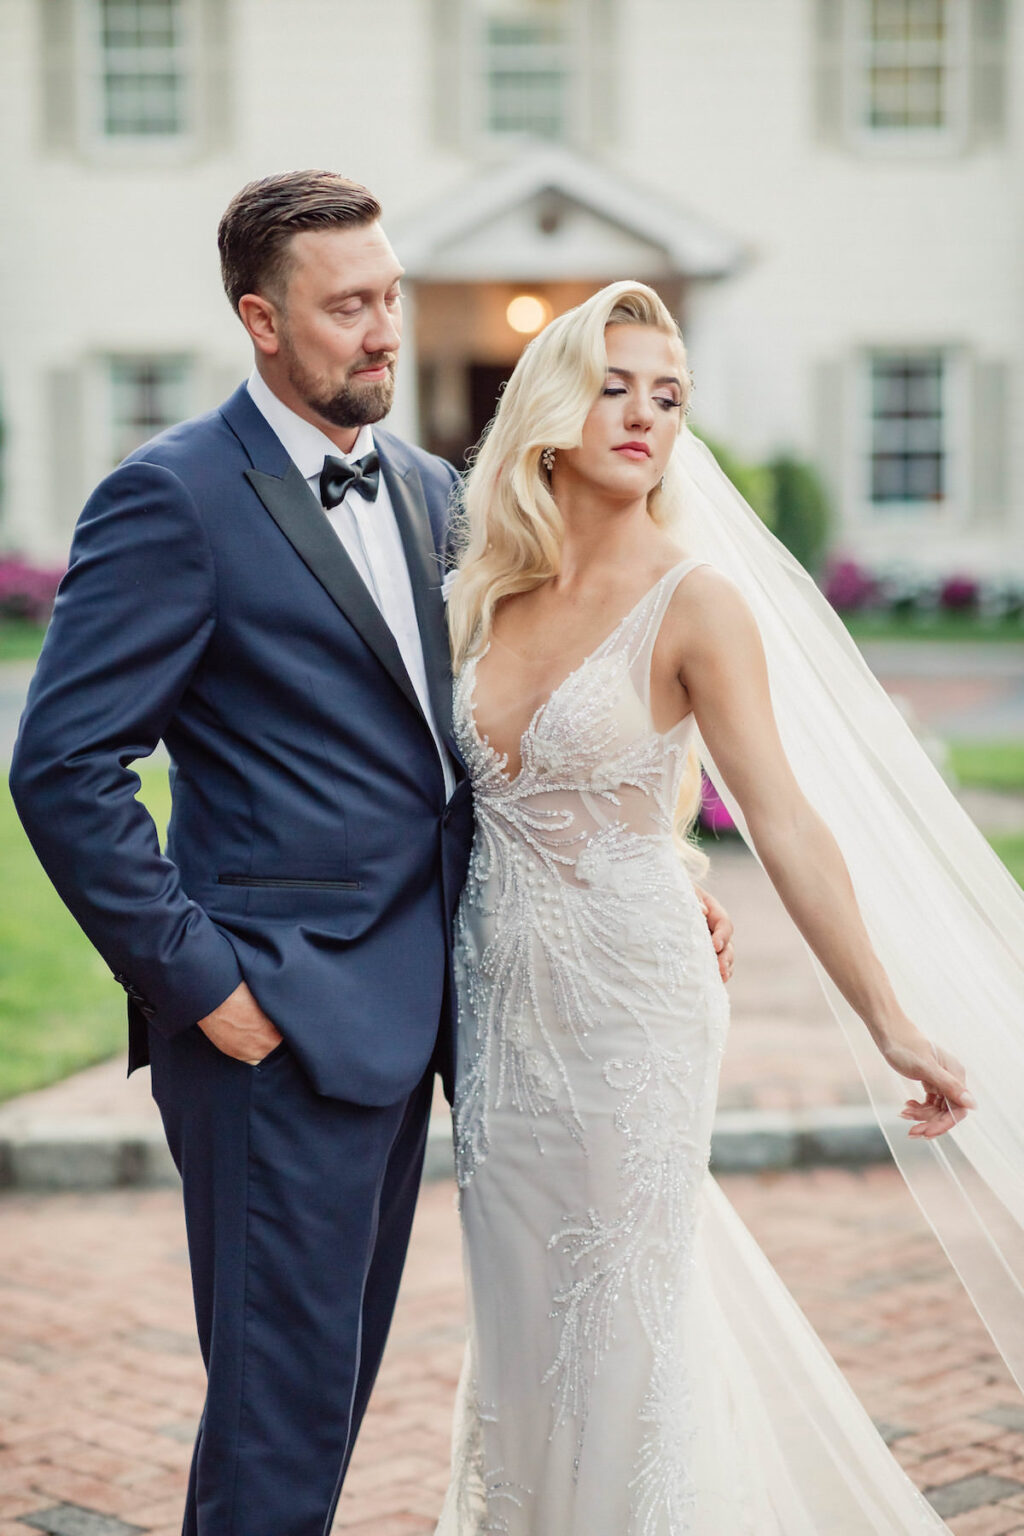 This Elegant Wedding is Filled with Wow-Worthy, Romantic Elements